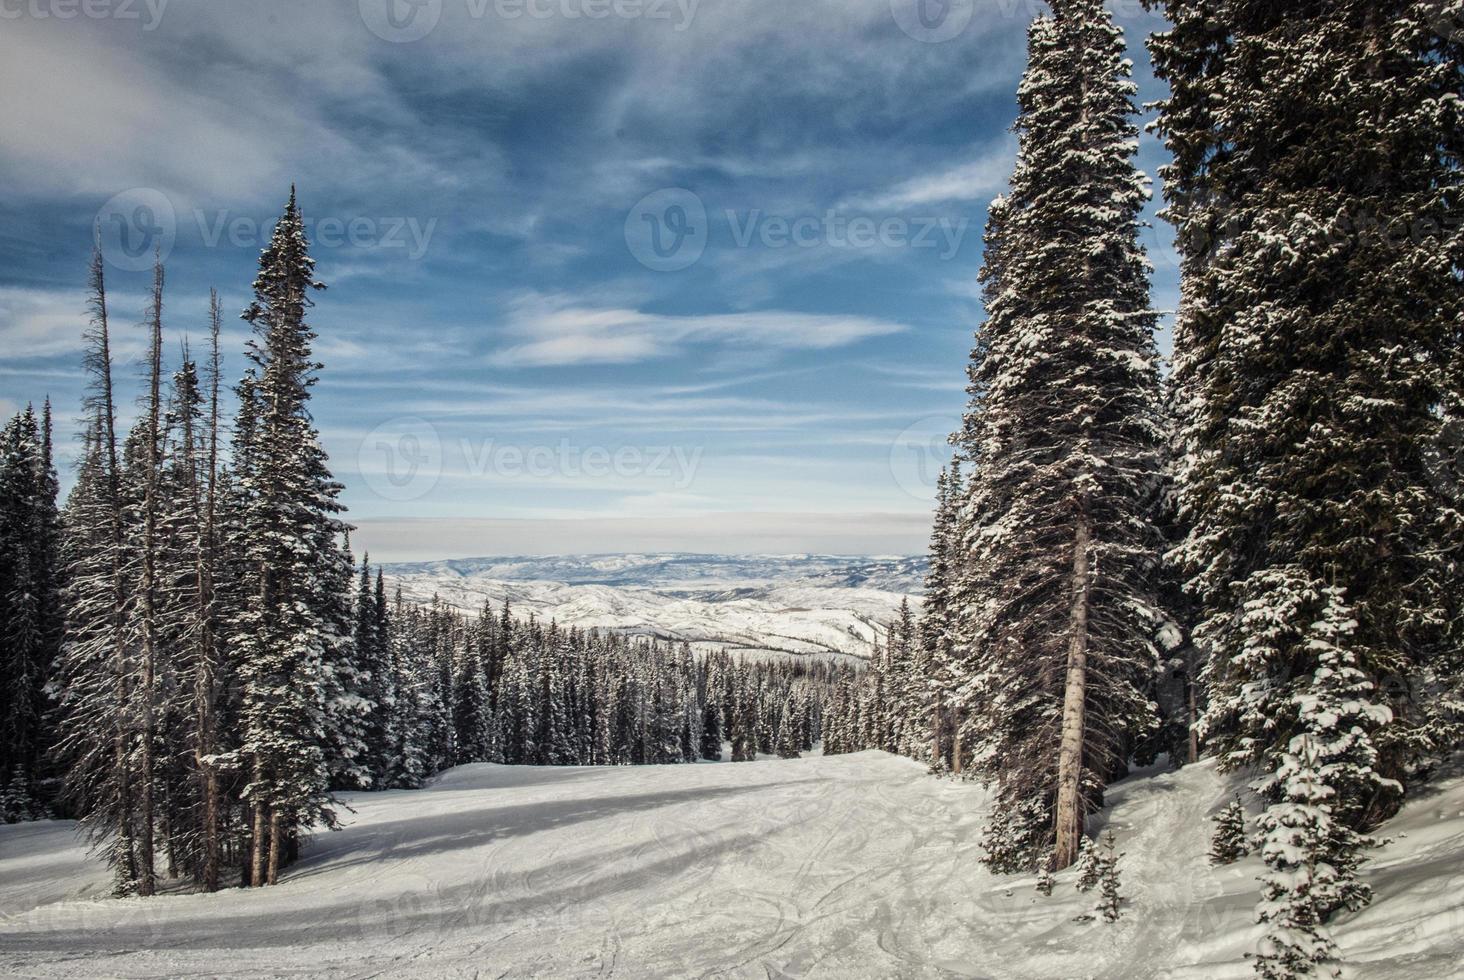 Winter snowy landscape with pine trees. Aspen mountain. photo